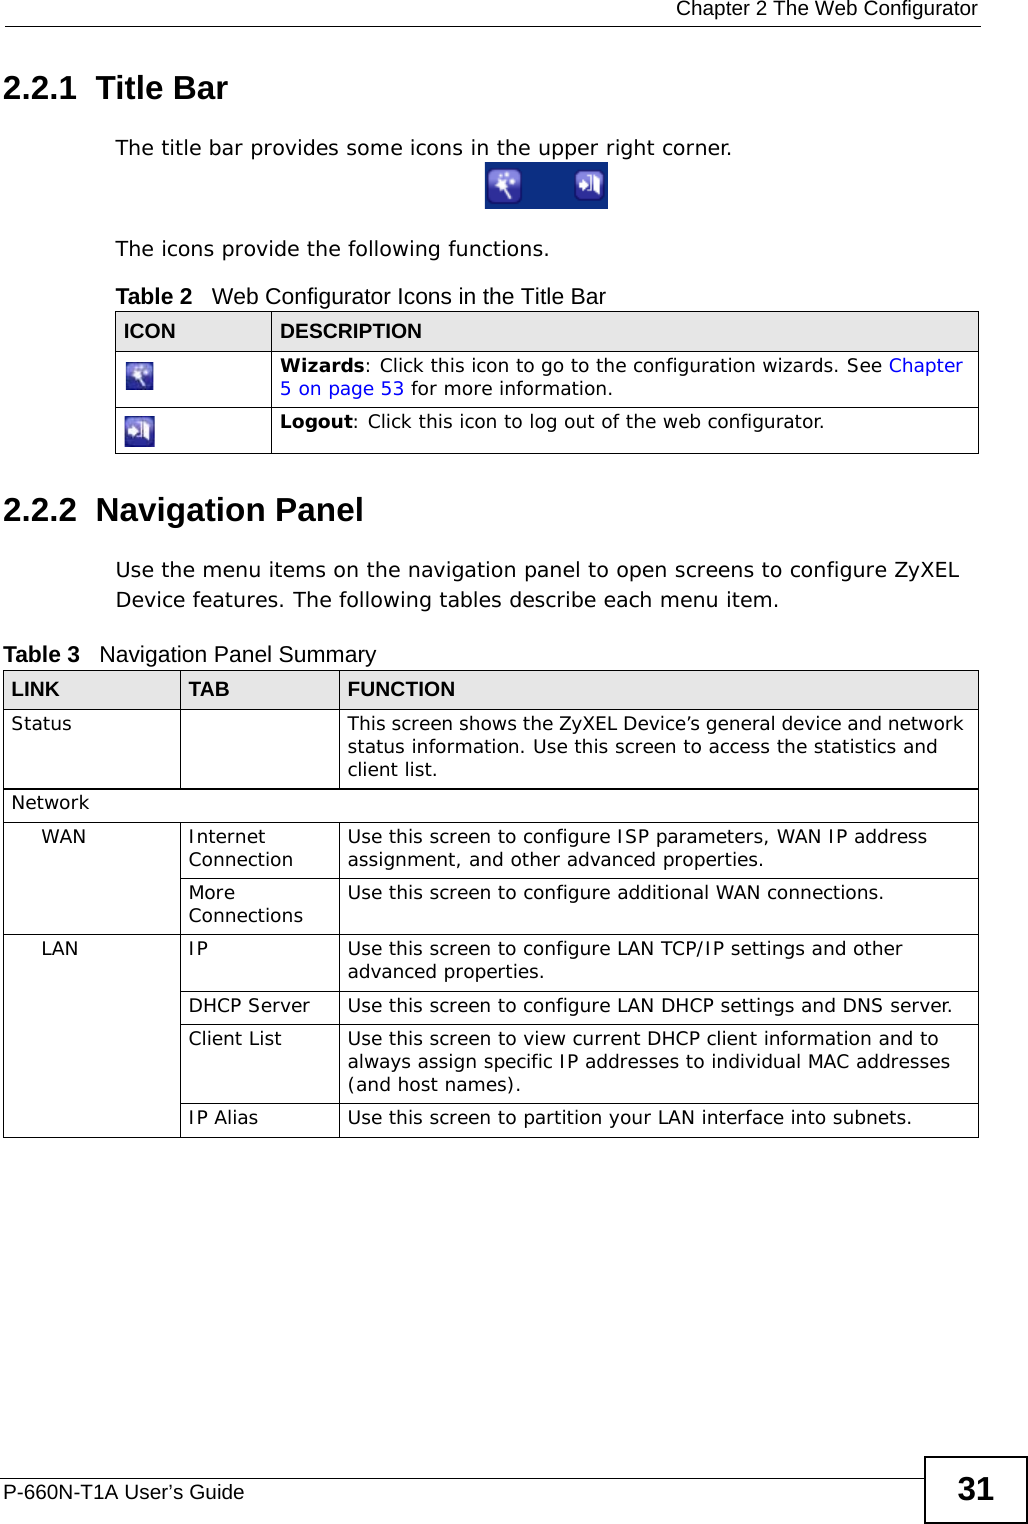  Chapter 2 The Web ConfiguratorP-660N-T1A User’s Guide 312.2.1  Title BarThe title bar provides some icons in the upper right corner.The icons provide the following functions.2.2.2  Navigation PanelUse the menu items on the navigation panel to open screens to configure ZyXEL Device features. The following tables describe each menu item.Table 2   Web Configurator Icons in the Title BarICON  DESCRIPTIONWizards: Click this icon to go to the configuration wizards. See Chapter 5 on page 53 for more information.Logout: Click this icon to log out of the web configurator.Table 3   Navigation Panel SummaryLINK TAB FUNCTIONStatus This screen shows the ZyXEL Device’s general device and network status information. Use this screen to access the statistics and client list.NetworkWAN Internet Connection Use this screen to configure ISP parameters, WAN IP address assignment, and other advanced properties.More Connections Use this screen to configure additional WAN connections.LAN IP Use this screen to configure LAN TCP/IP settings and other advanced properties.DHCP Server Use this screen to configure LAN DHCP settings and DNS server.Client List Use this screen to view current DHCP client information and to always assign specific IP addresses to individual MAC addresses (and host names).IP Alias Use this screen to partition your LAN interface into subnets.